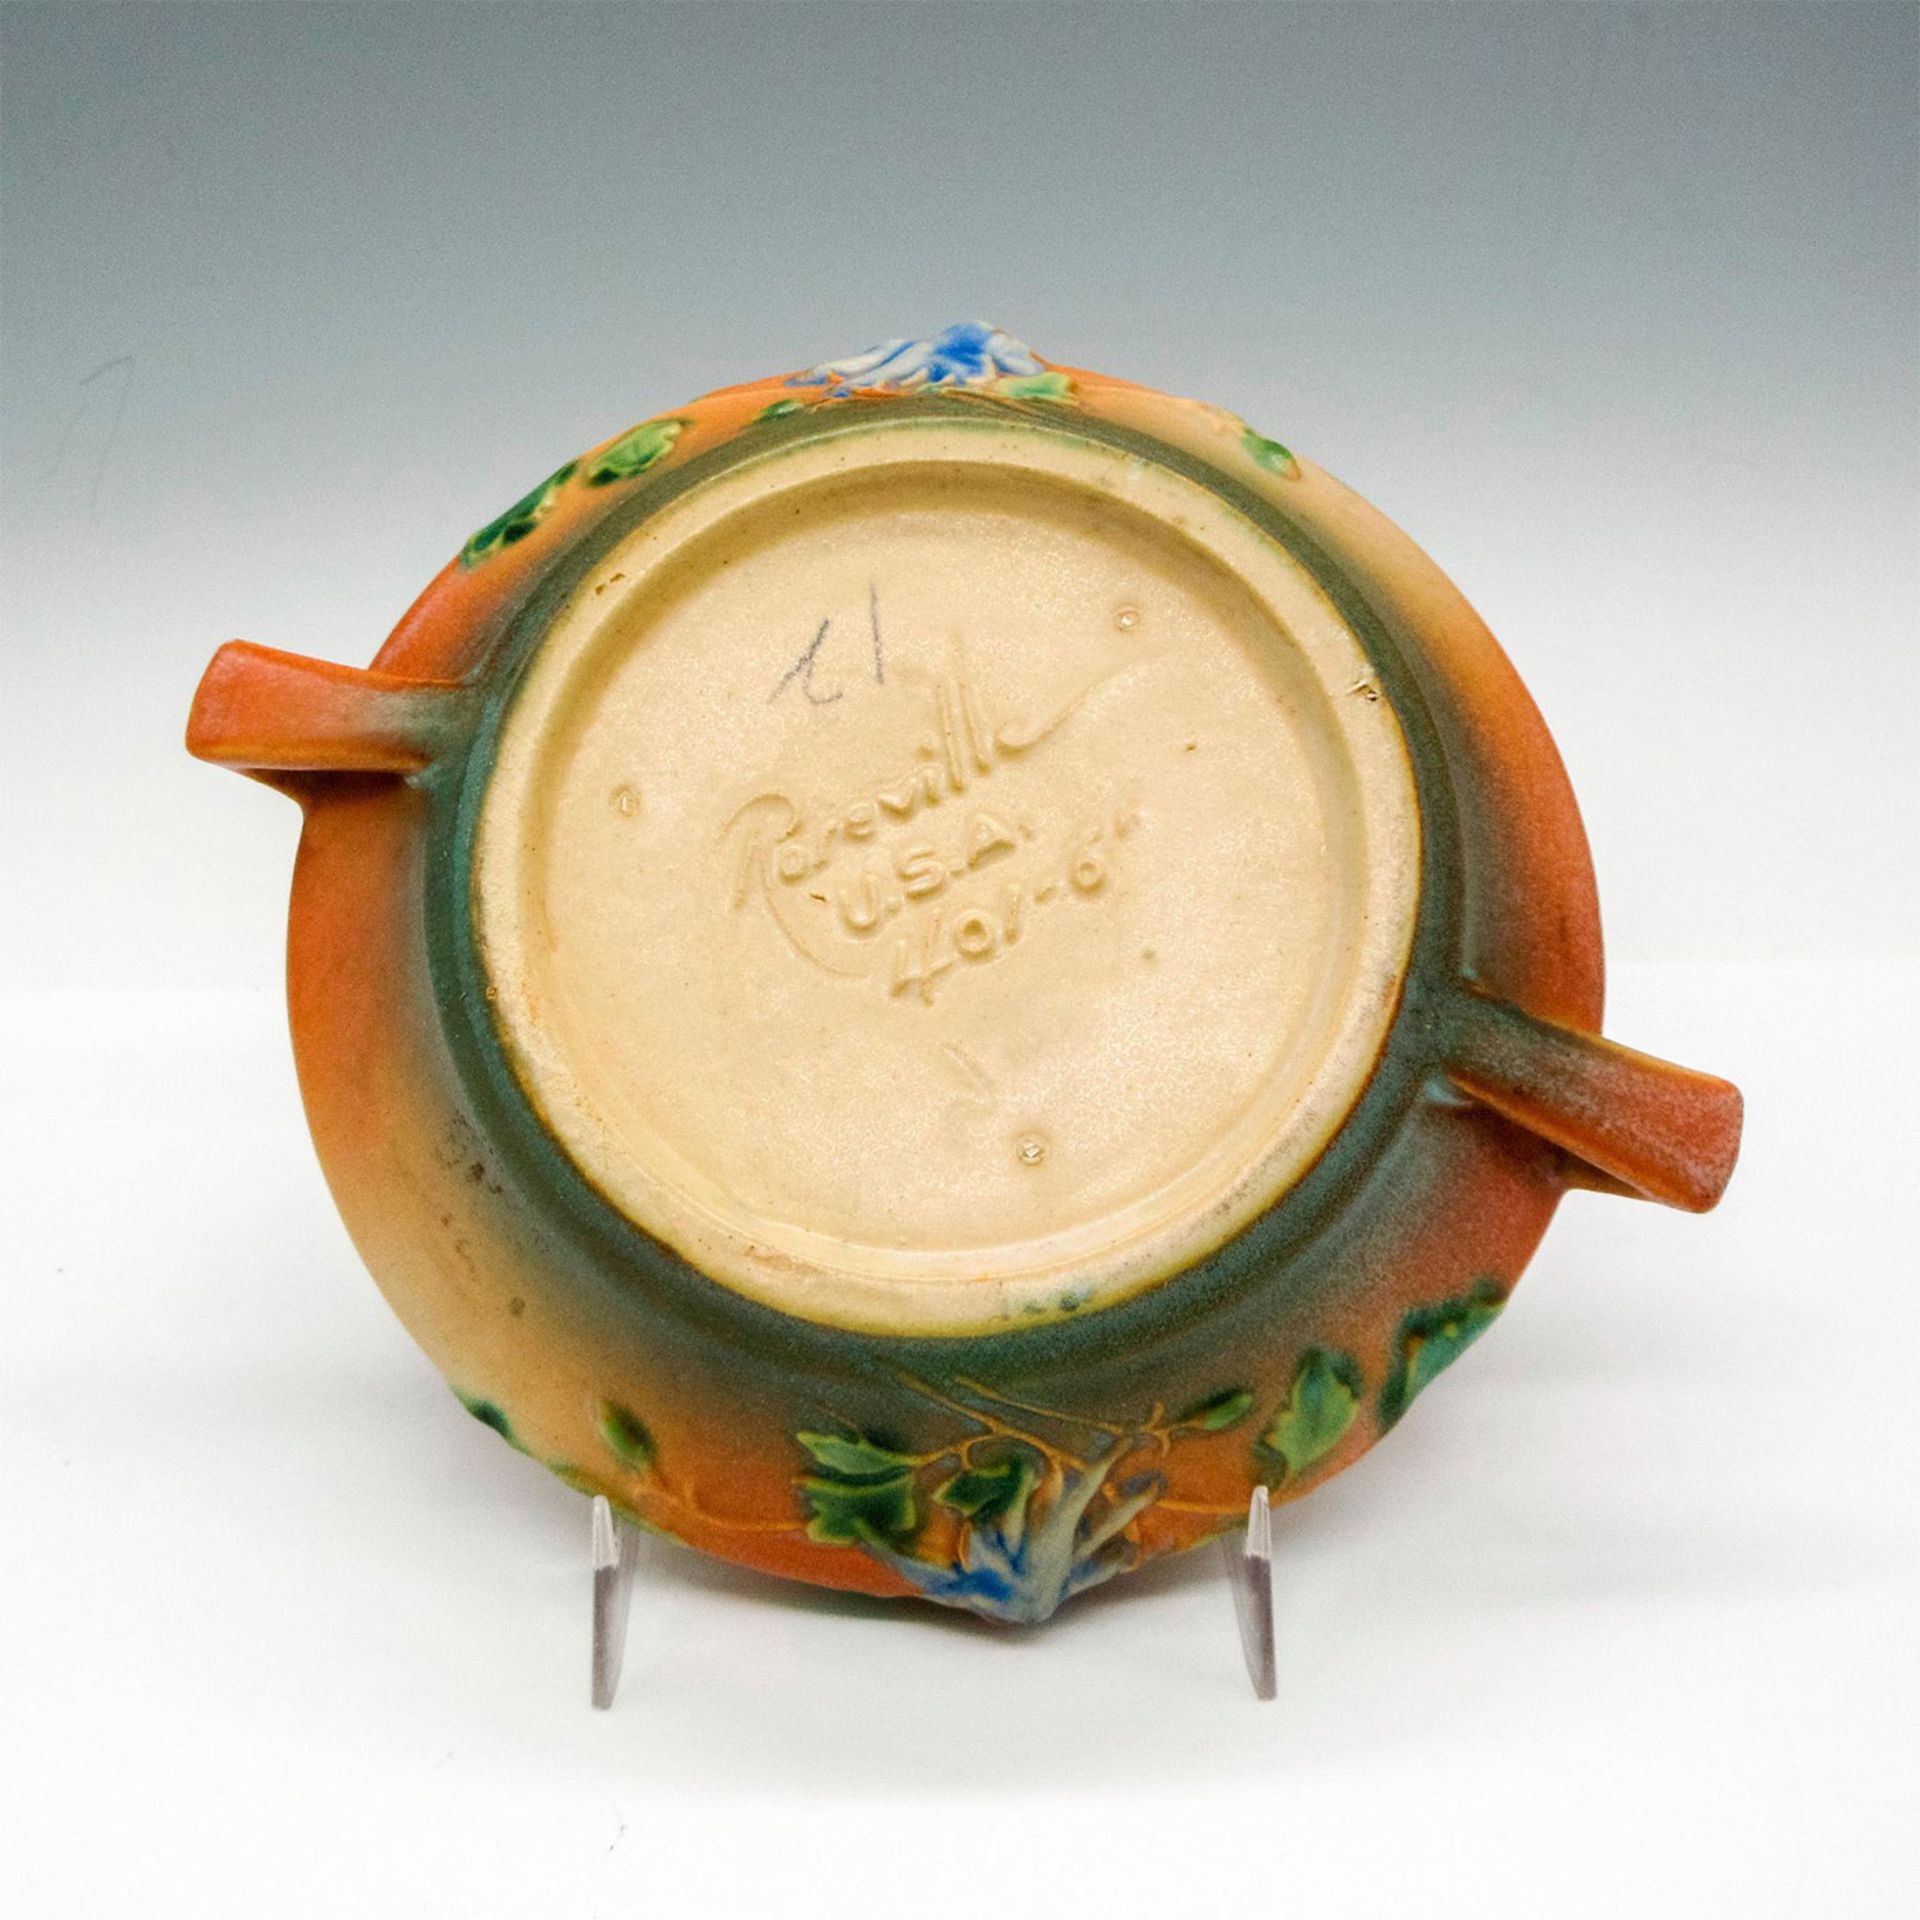 Roseville Pottery Double Handled Bowl, Columbine - Image 3 of 3